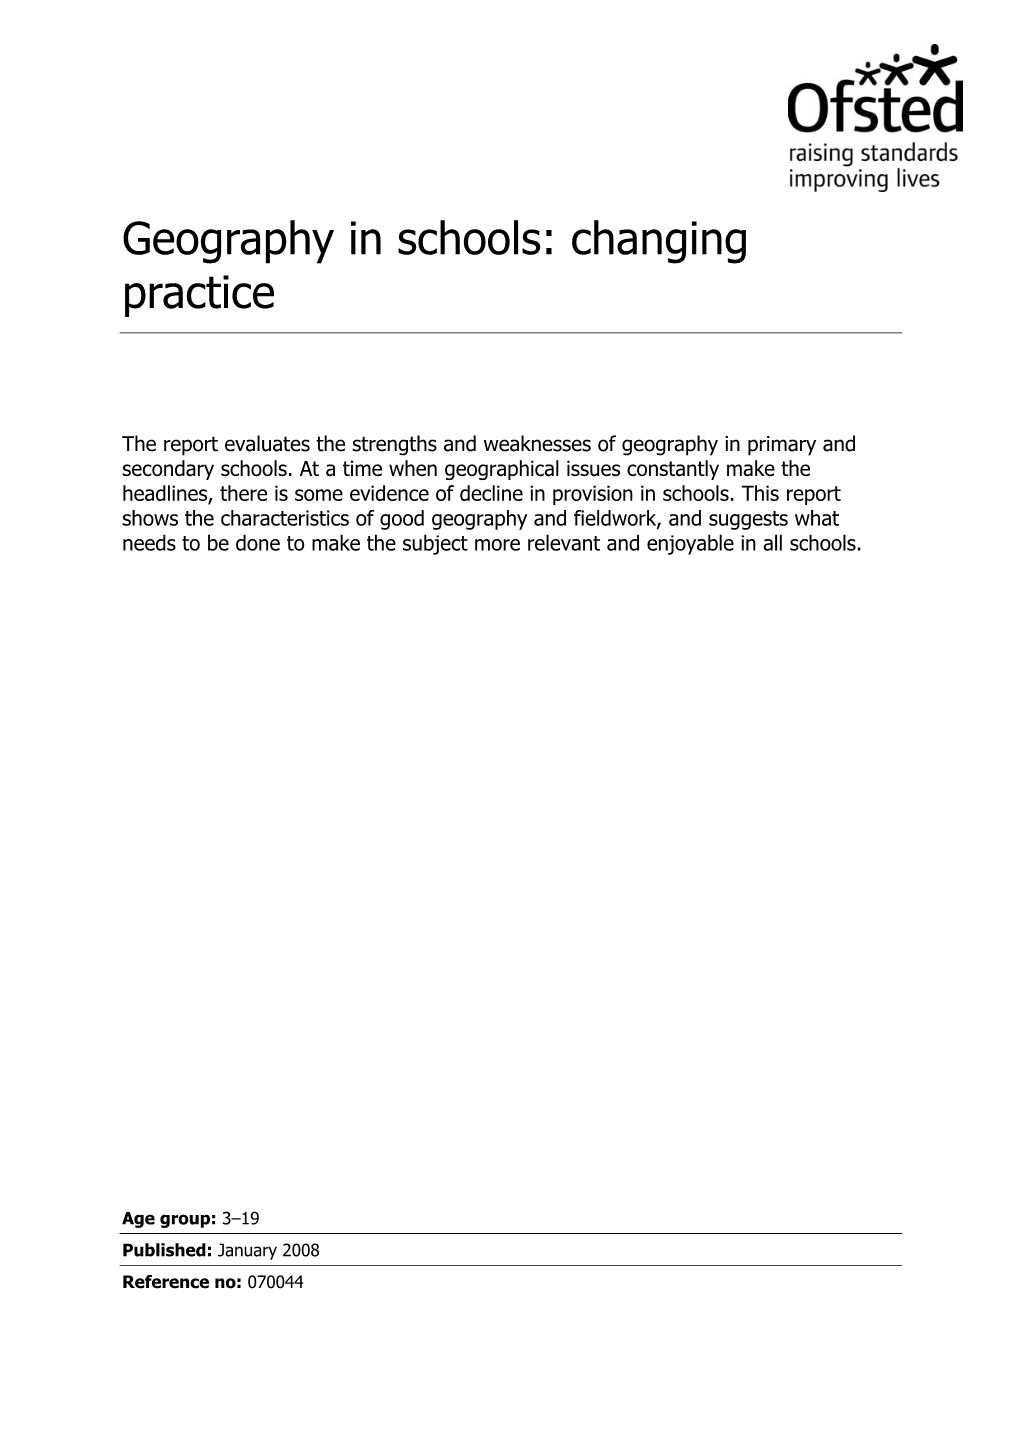 Geography in Schools: Changing Practice